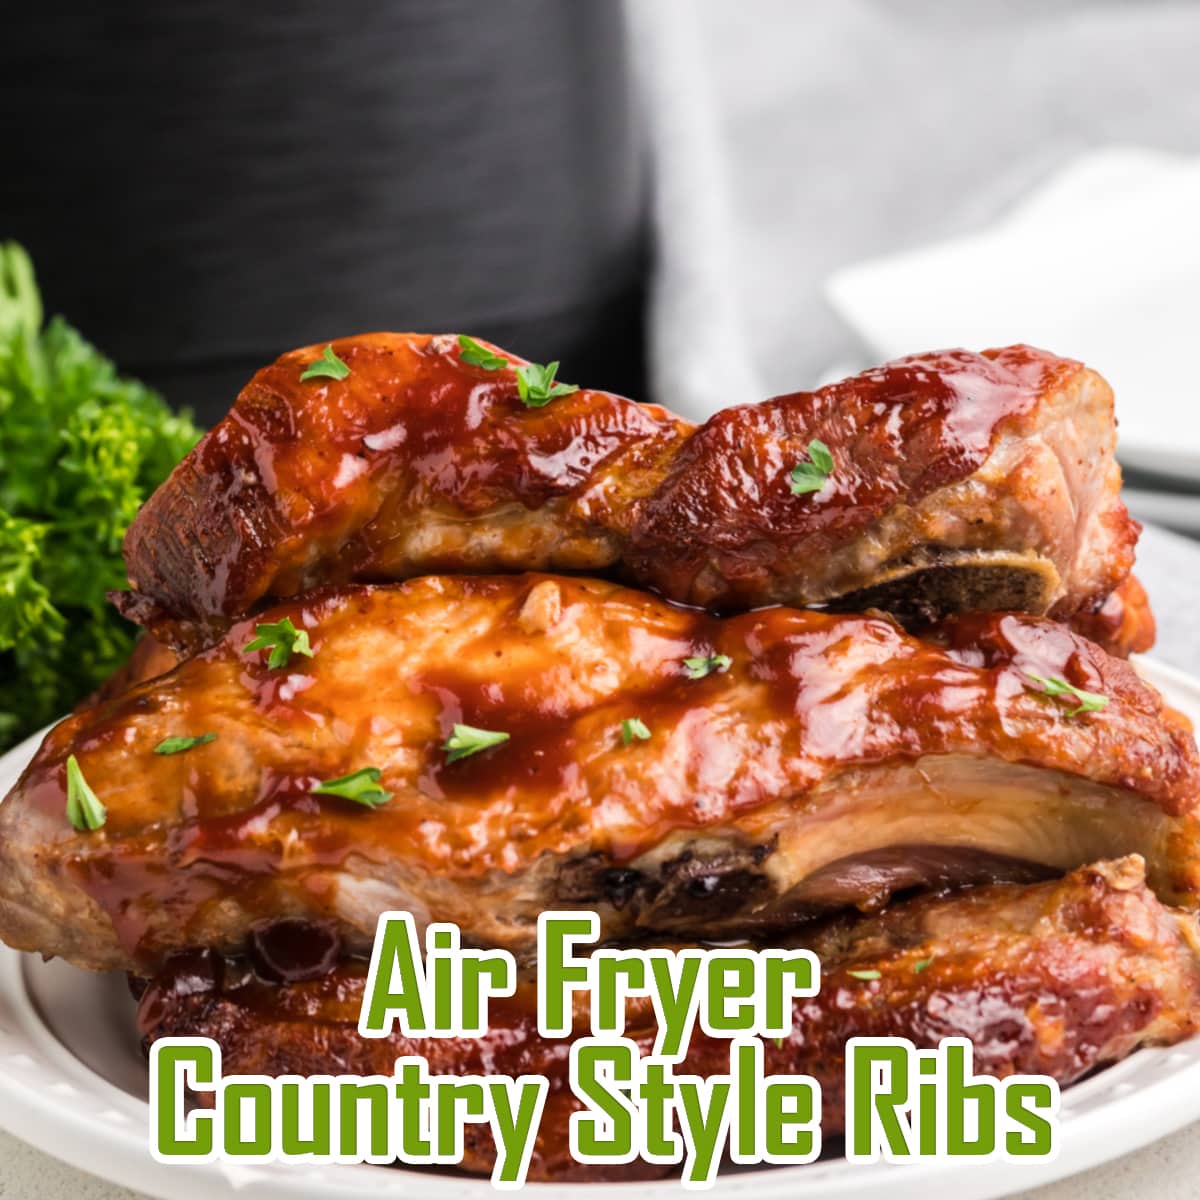  How to make loin country style ribs in an air fryer,fryerly